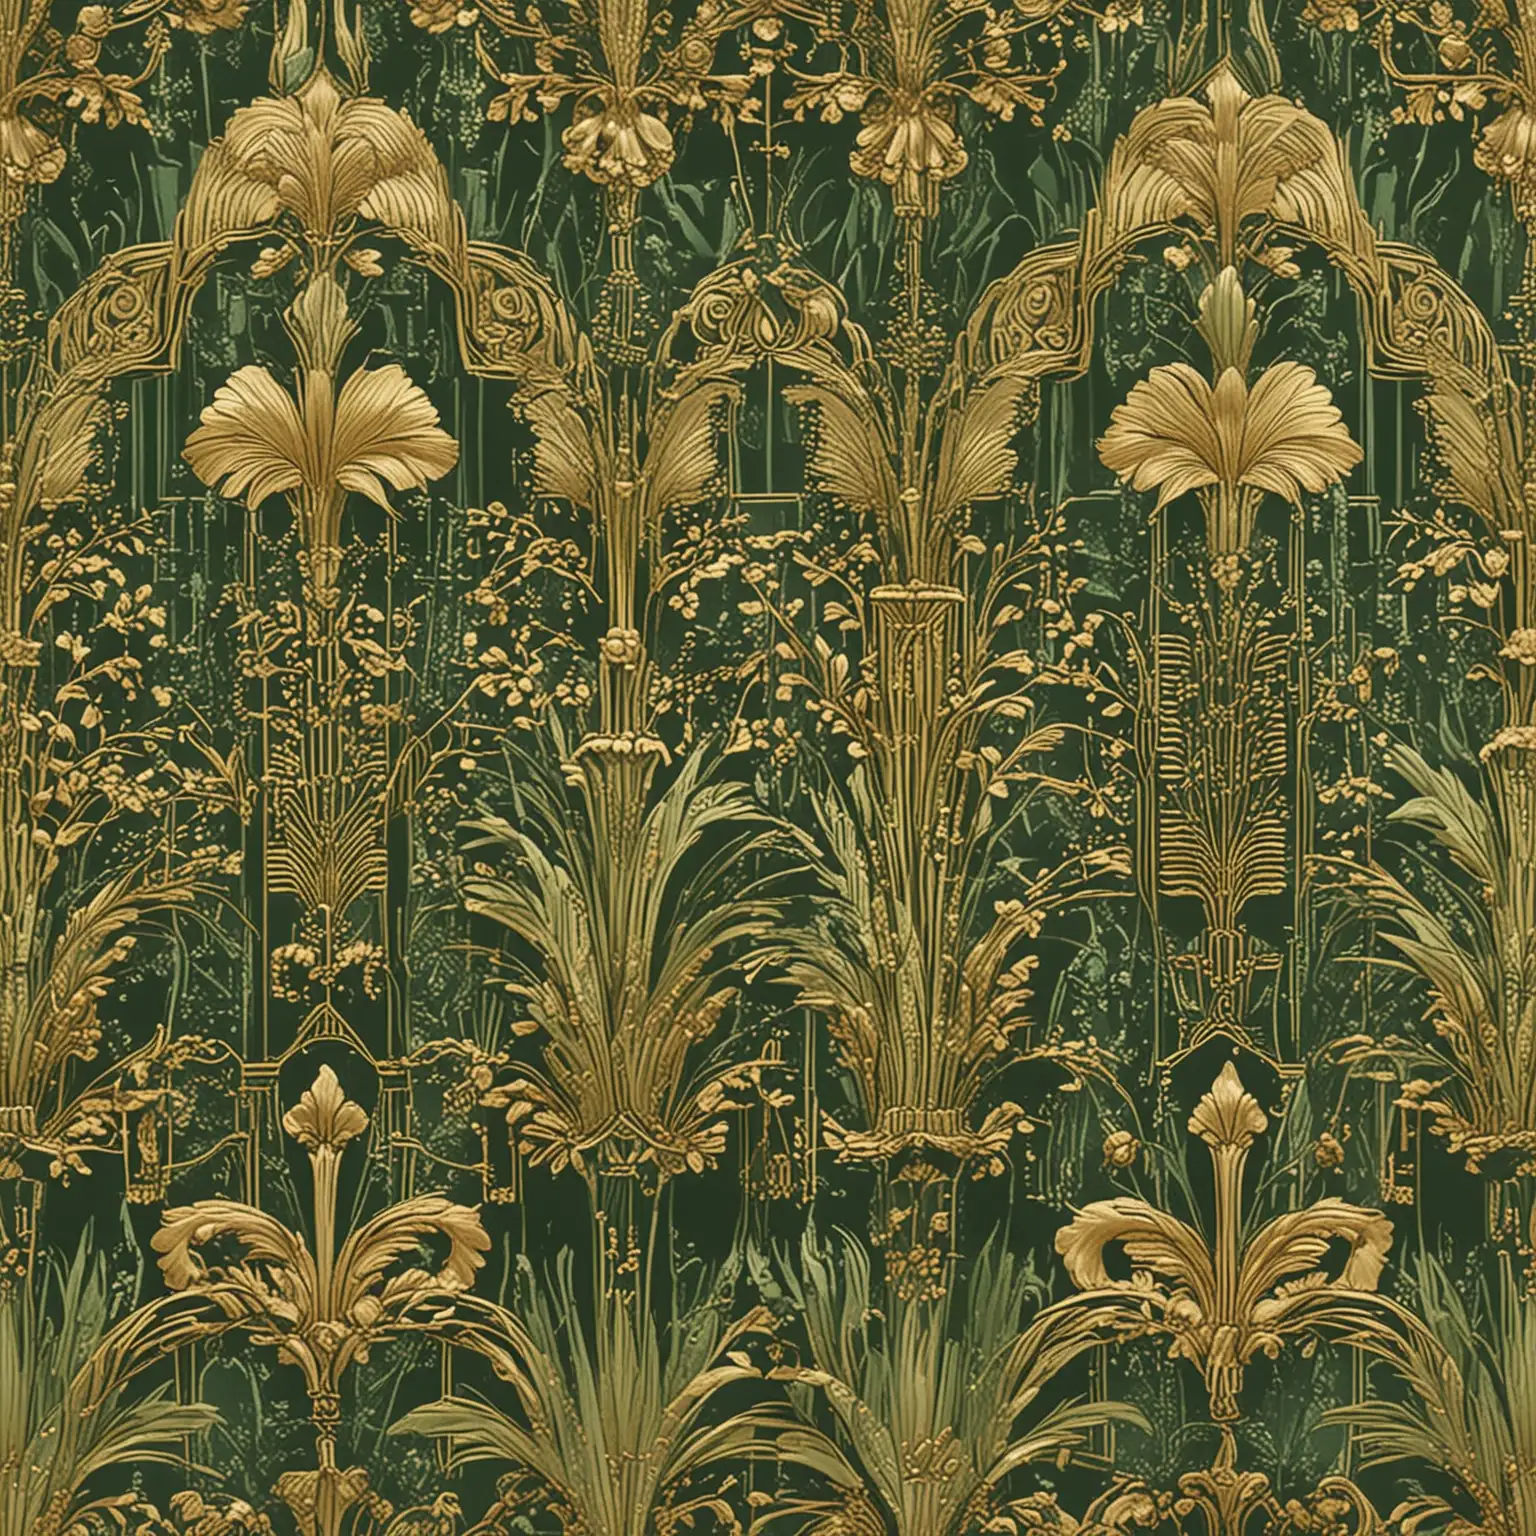 Art deco style wallpaper, colour green with very ornate gold in